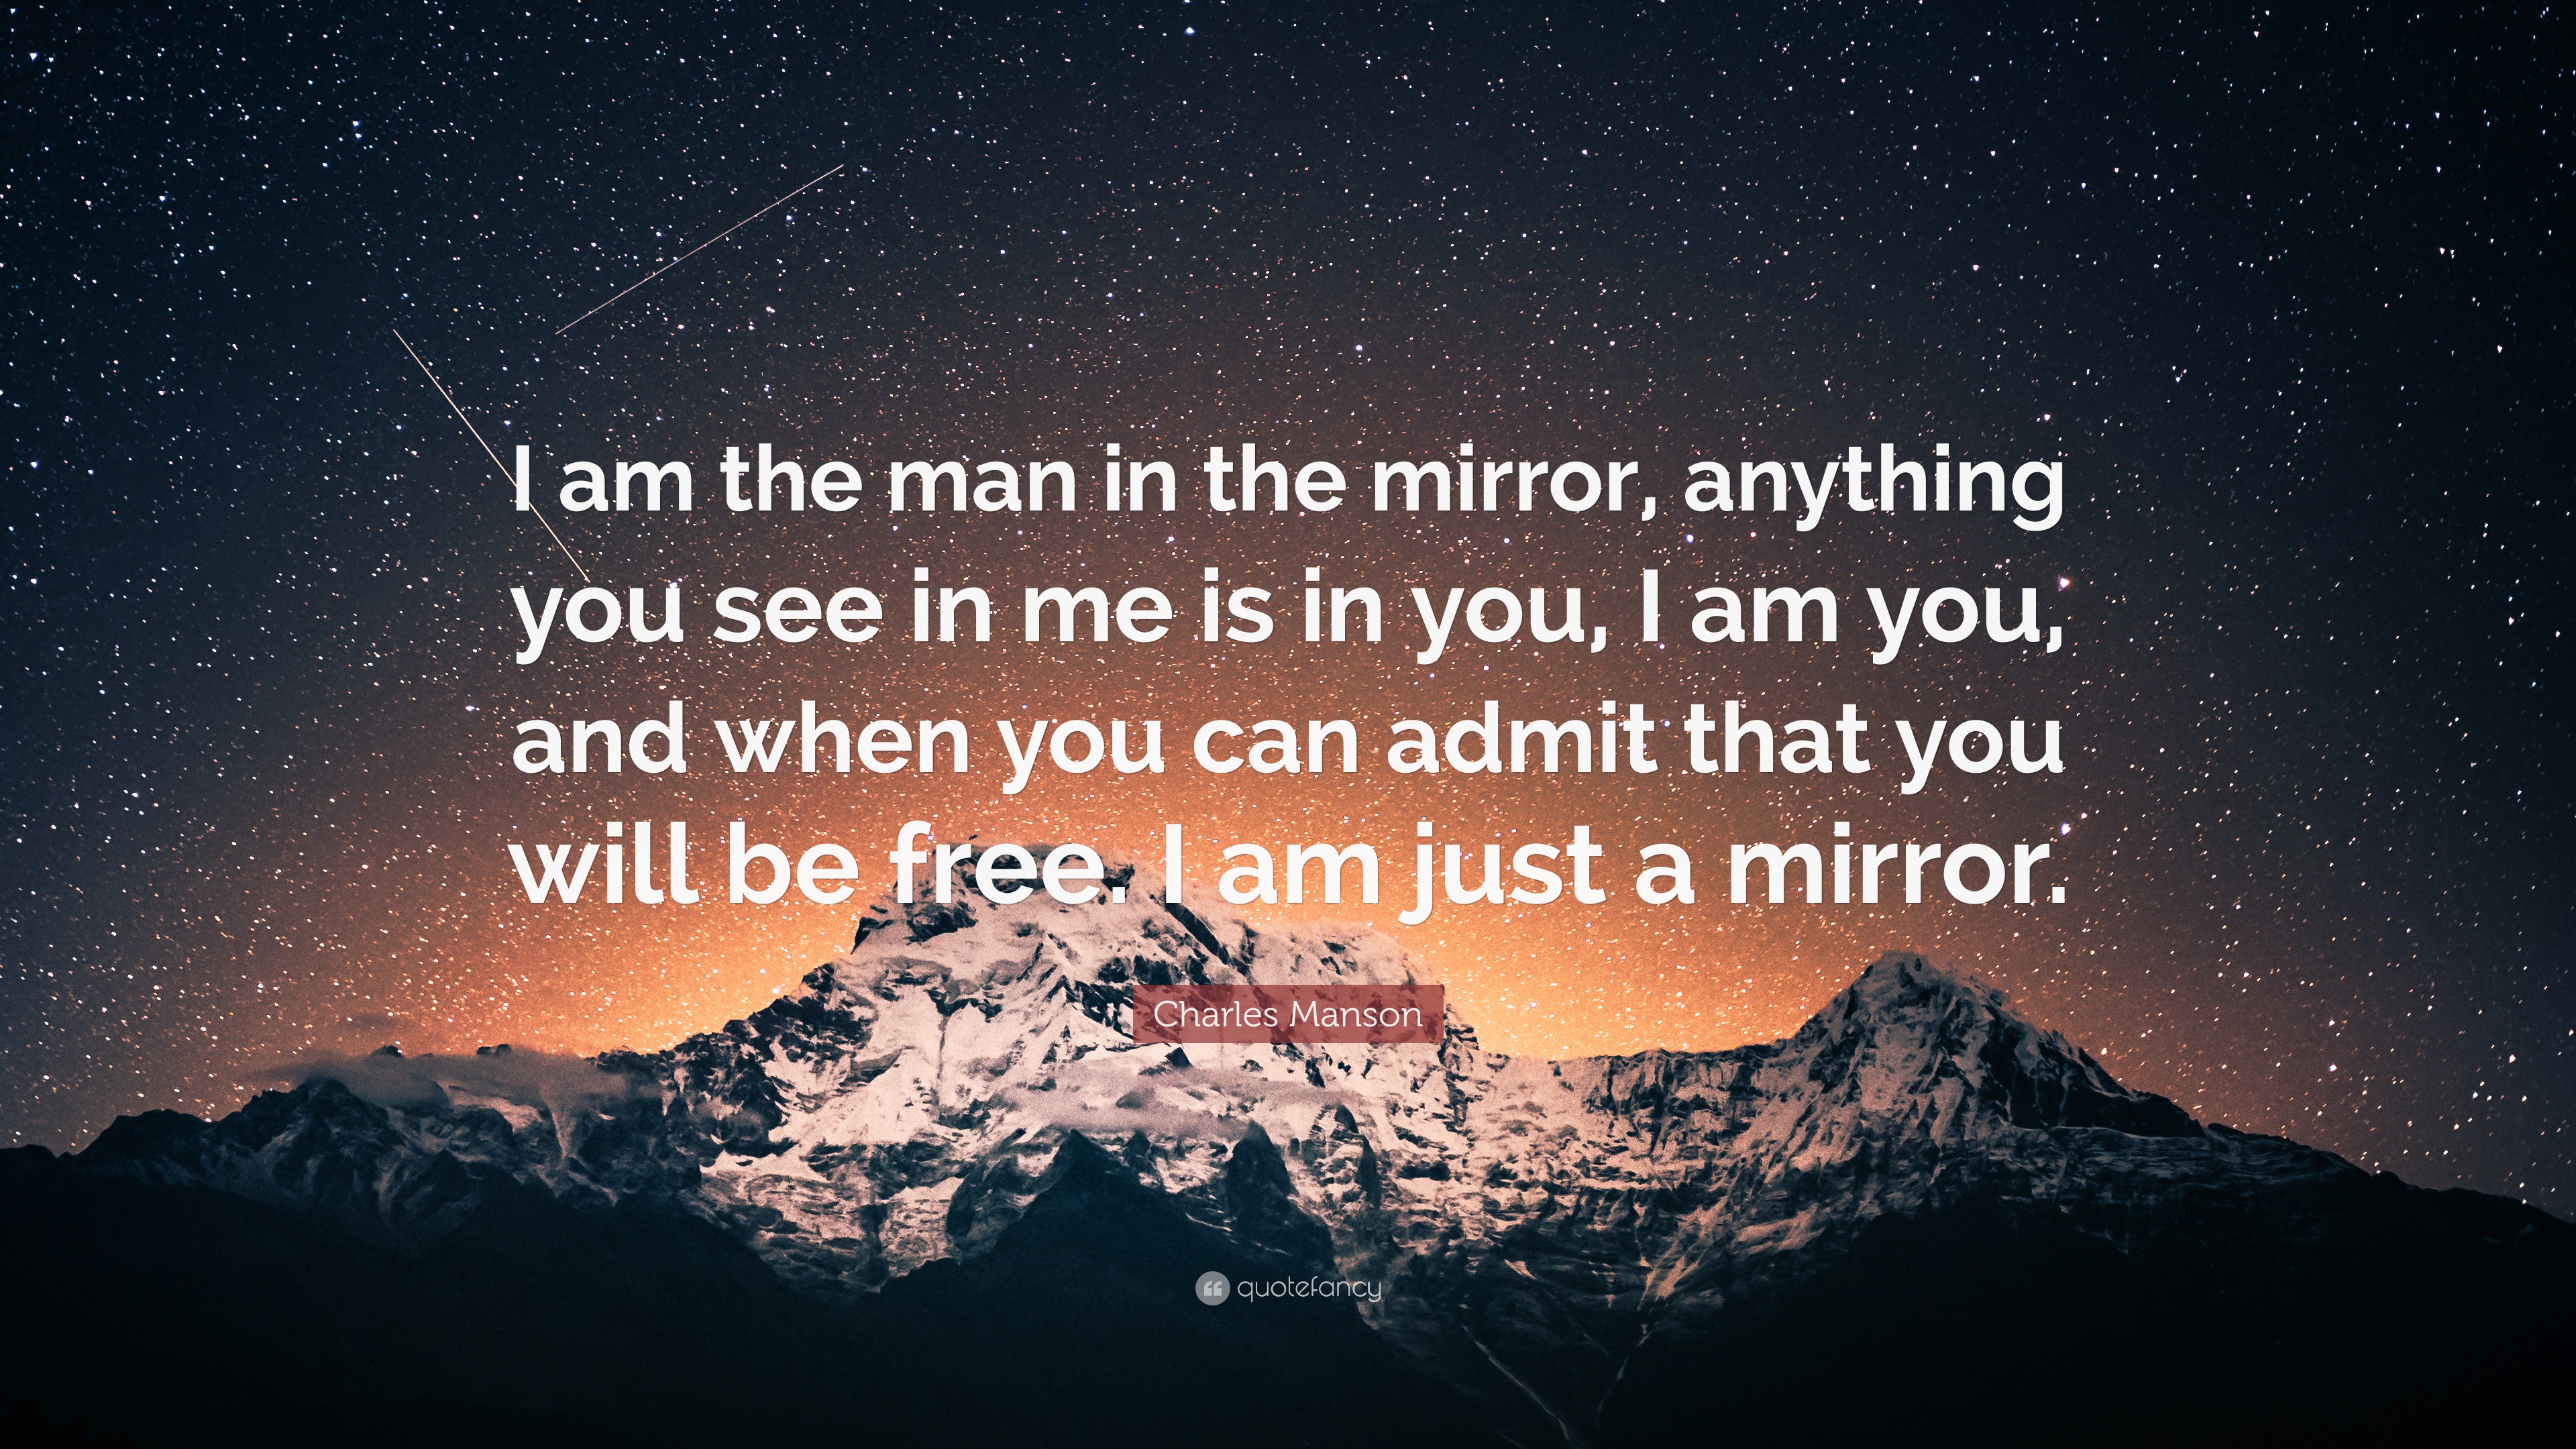 Charles Manson Quote: “I Am The Man In The Mirror, Anything You See In Me Is